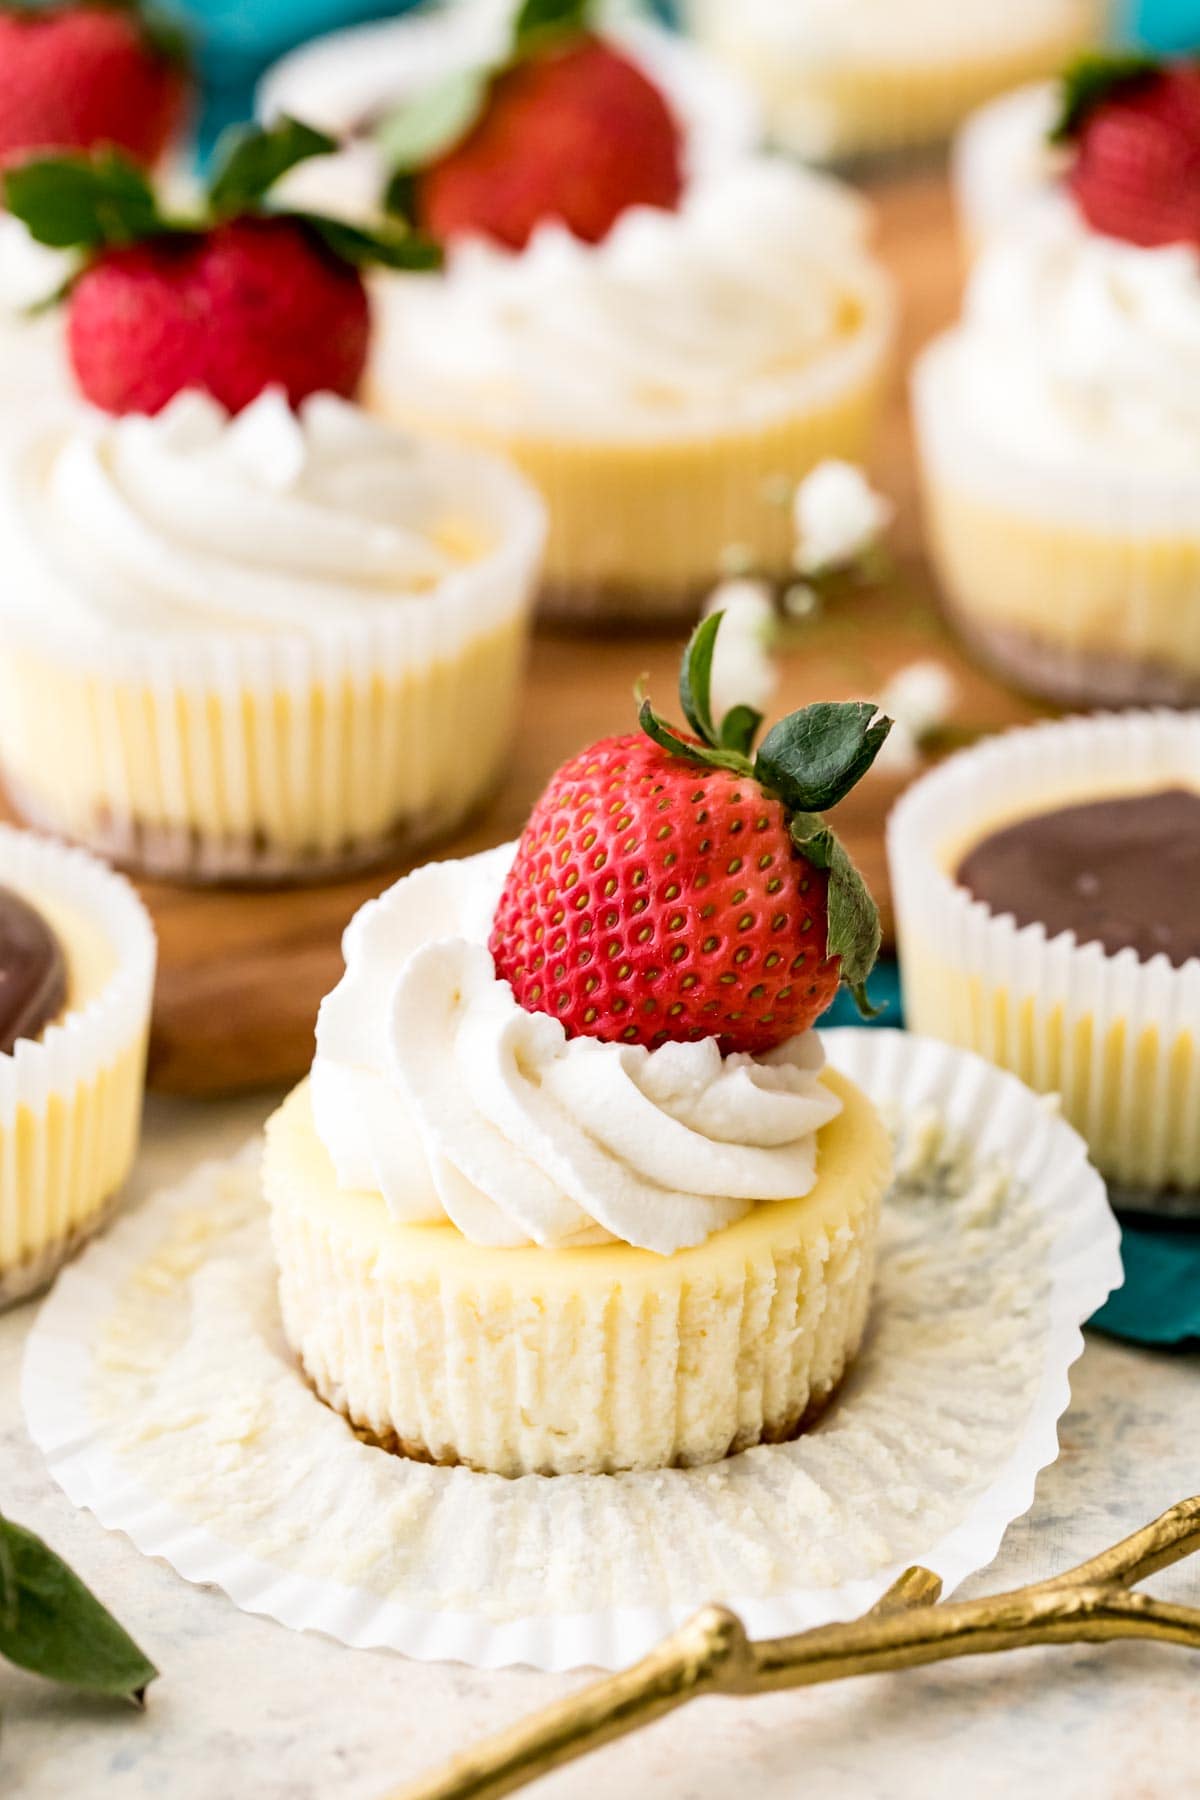 small, individual cheesecake served in a cupcake liner topped with whipped cream and a strawberry